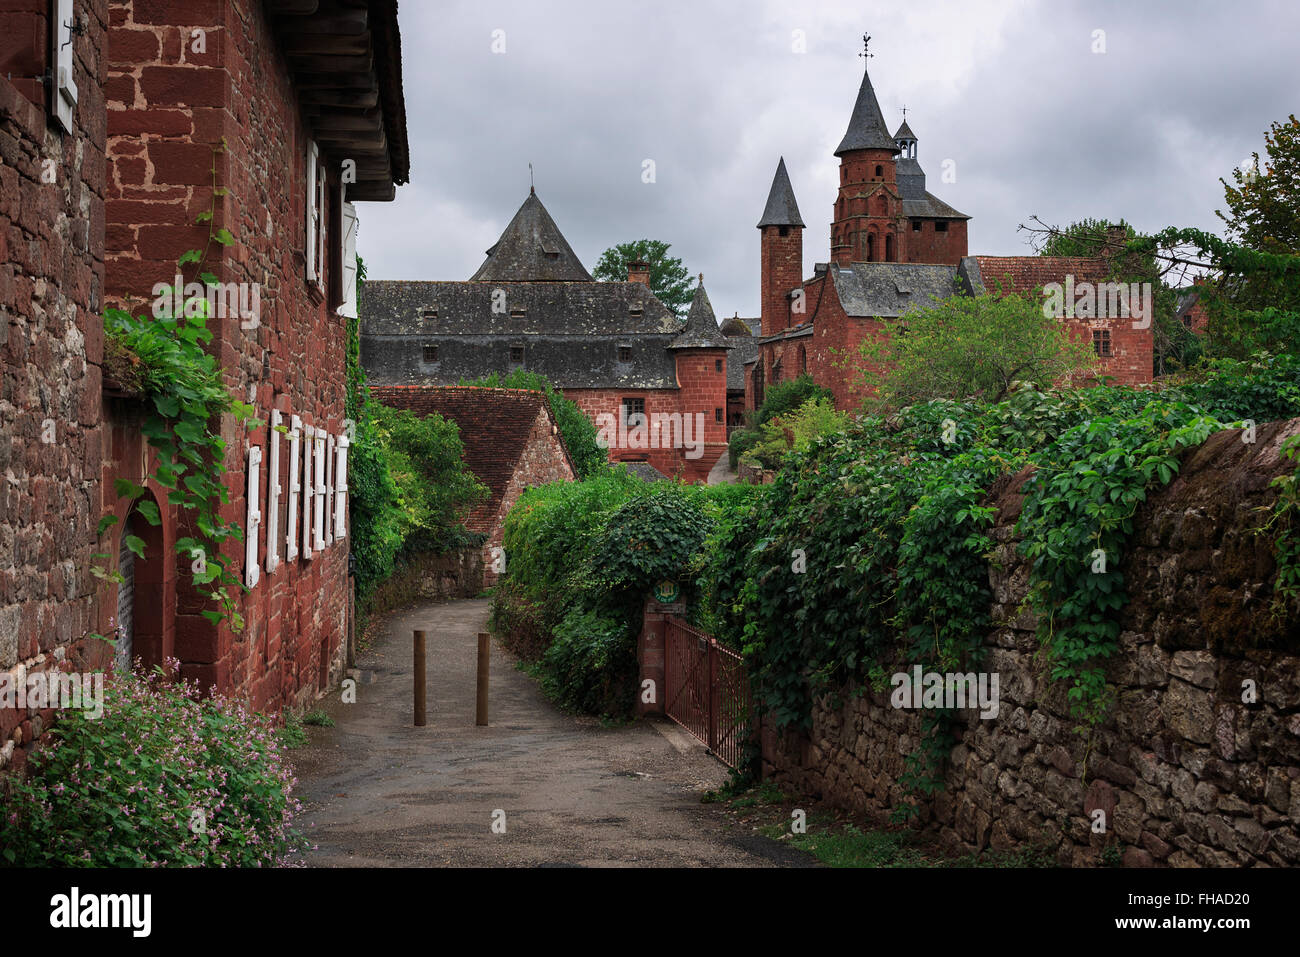 View on a path towards the tower of the church in red stone in the red village Collonges-la-Rouge in Dordogne area, France. Stock Photo